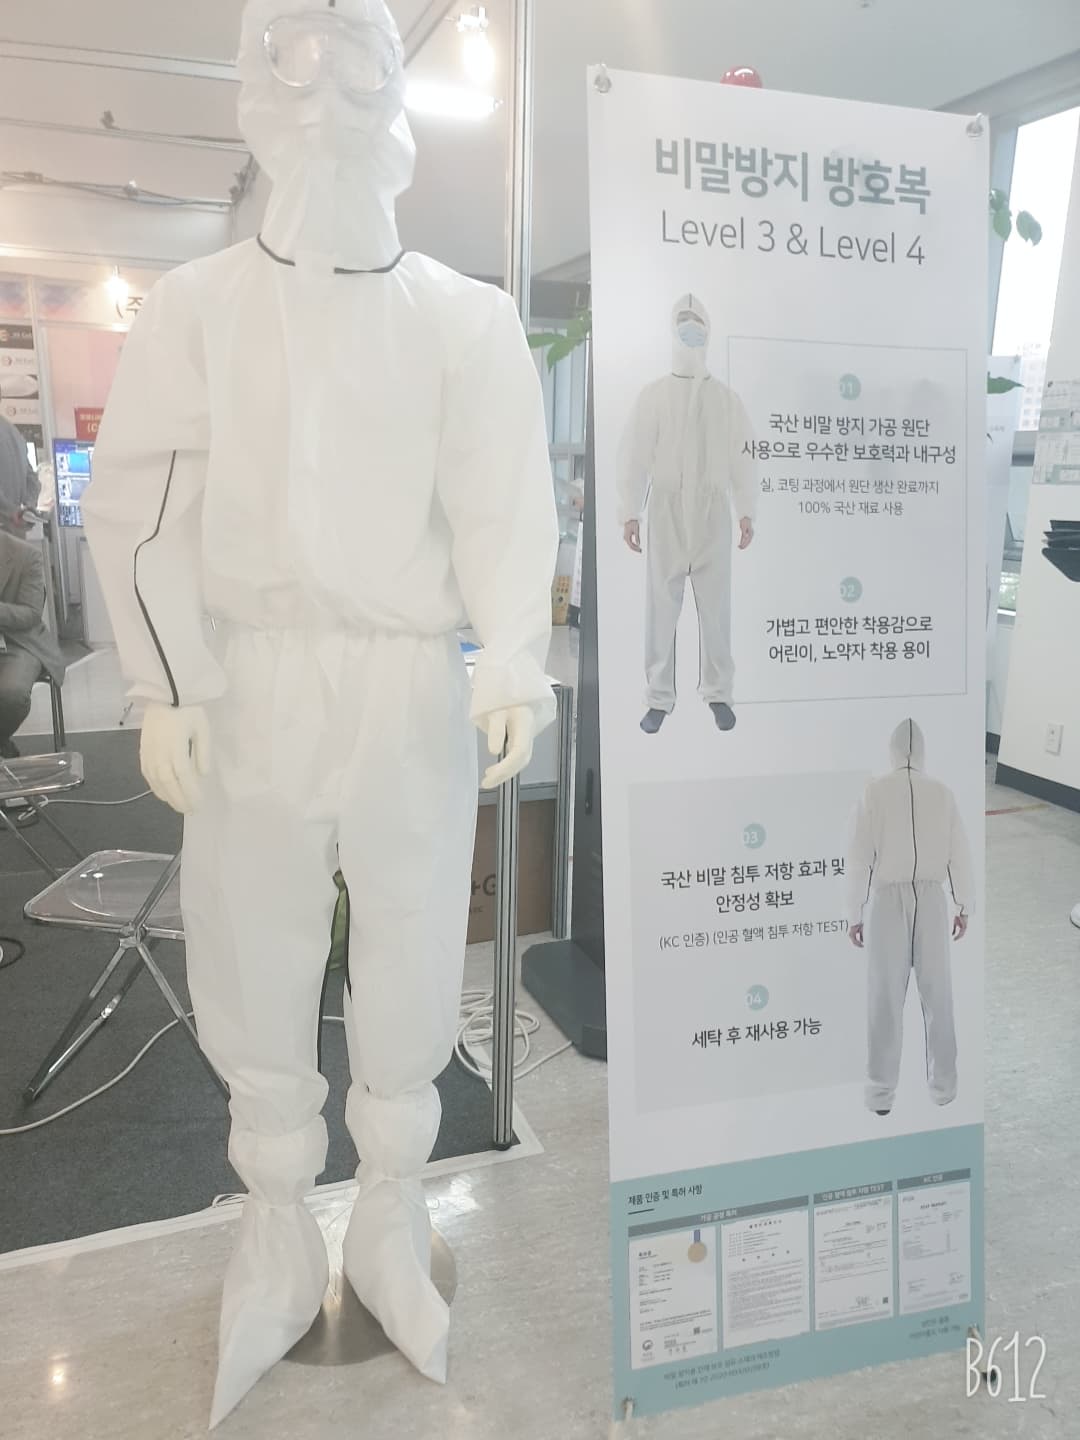 Woven Protective Suit _Level 3_4_